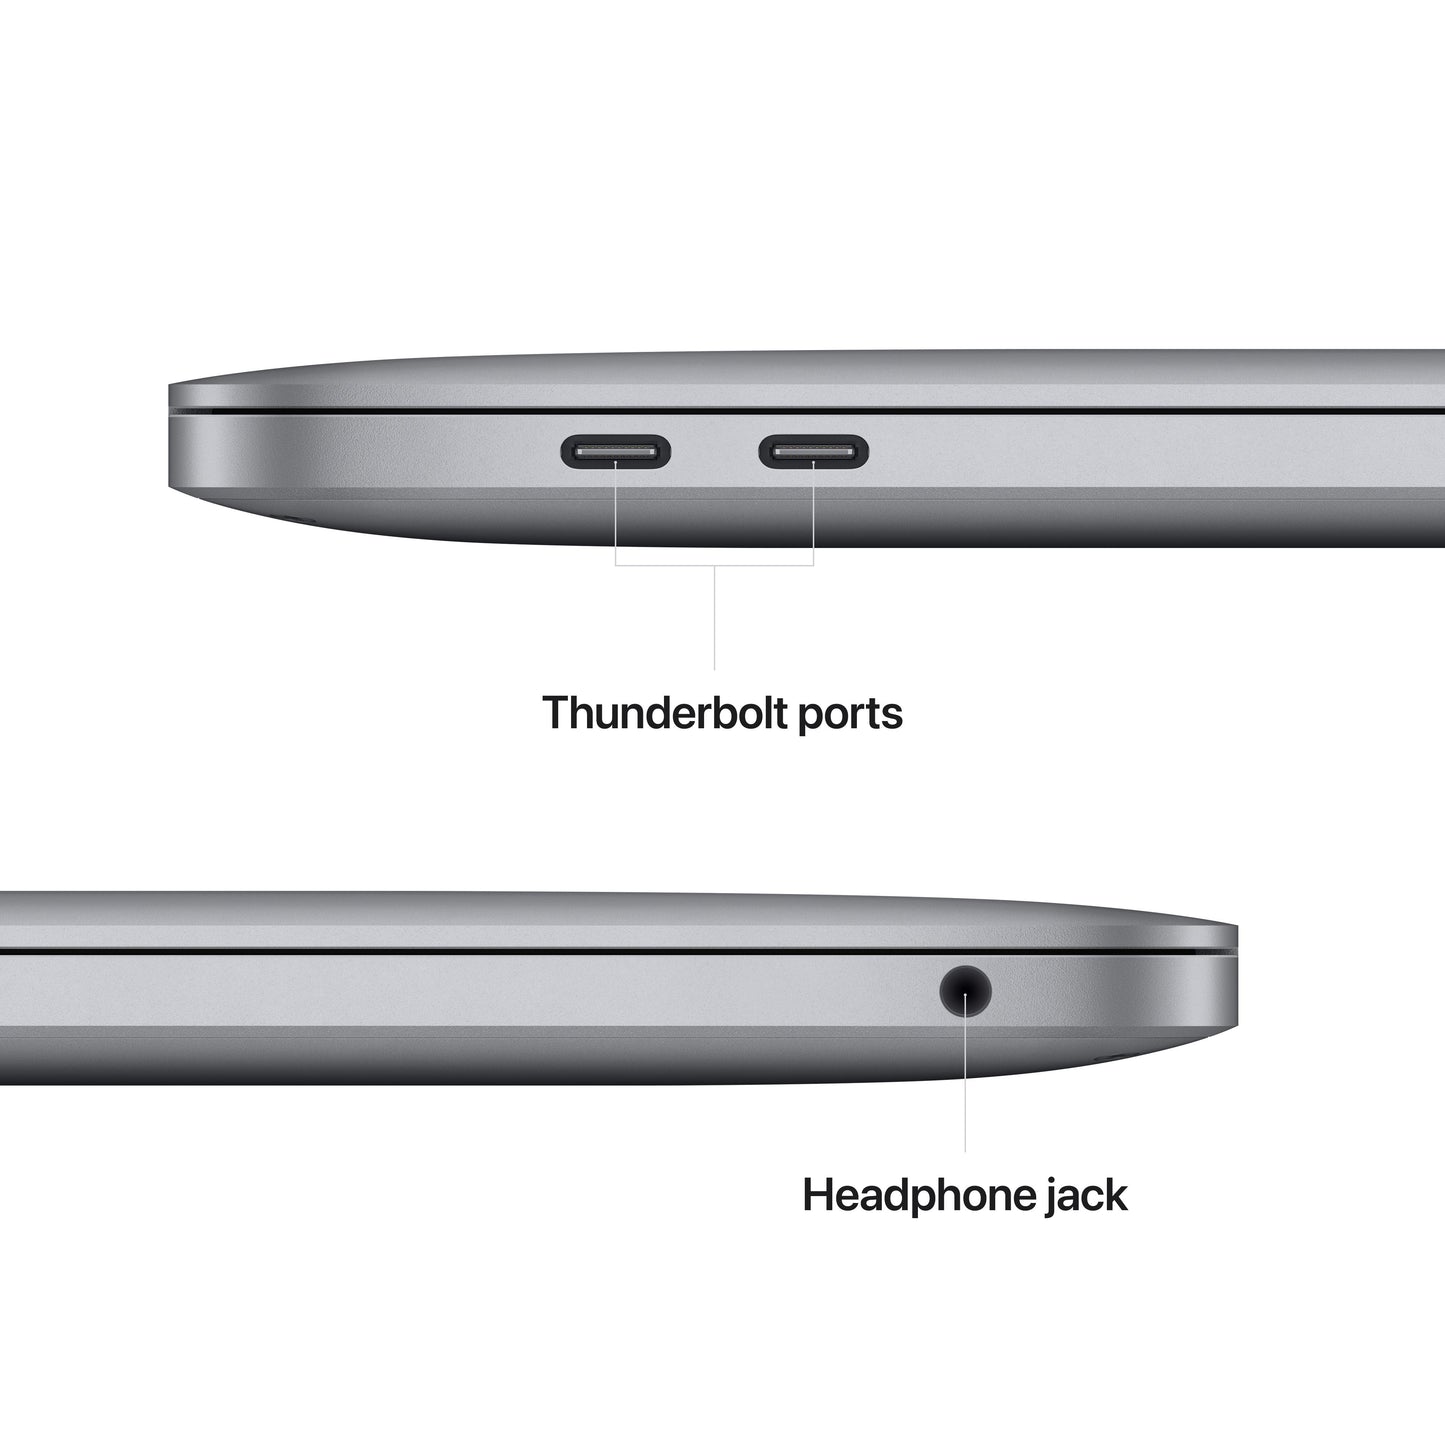 13-inch MacBook Pro: Apple M2 chip with 8‑core CPU and 10‑core GPU, 512GB SSD - Space Grey